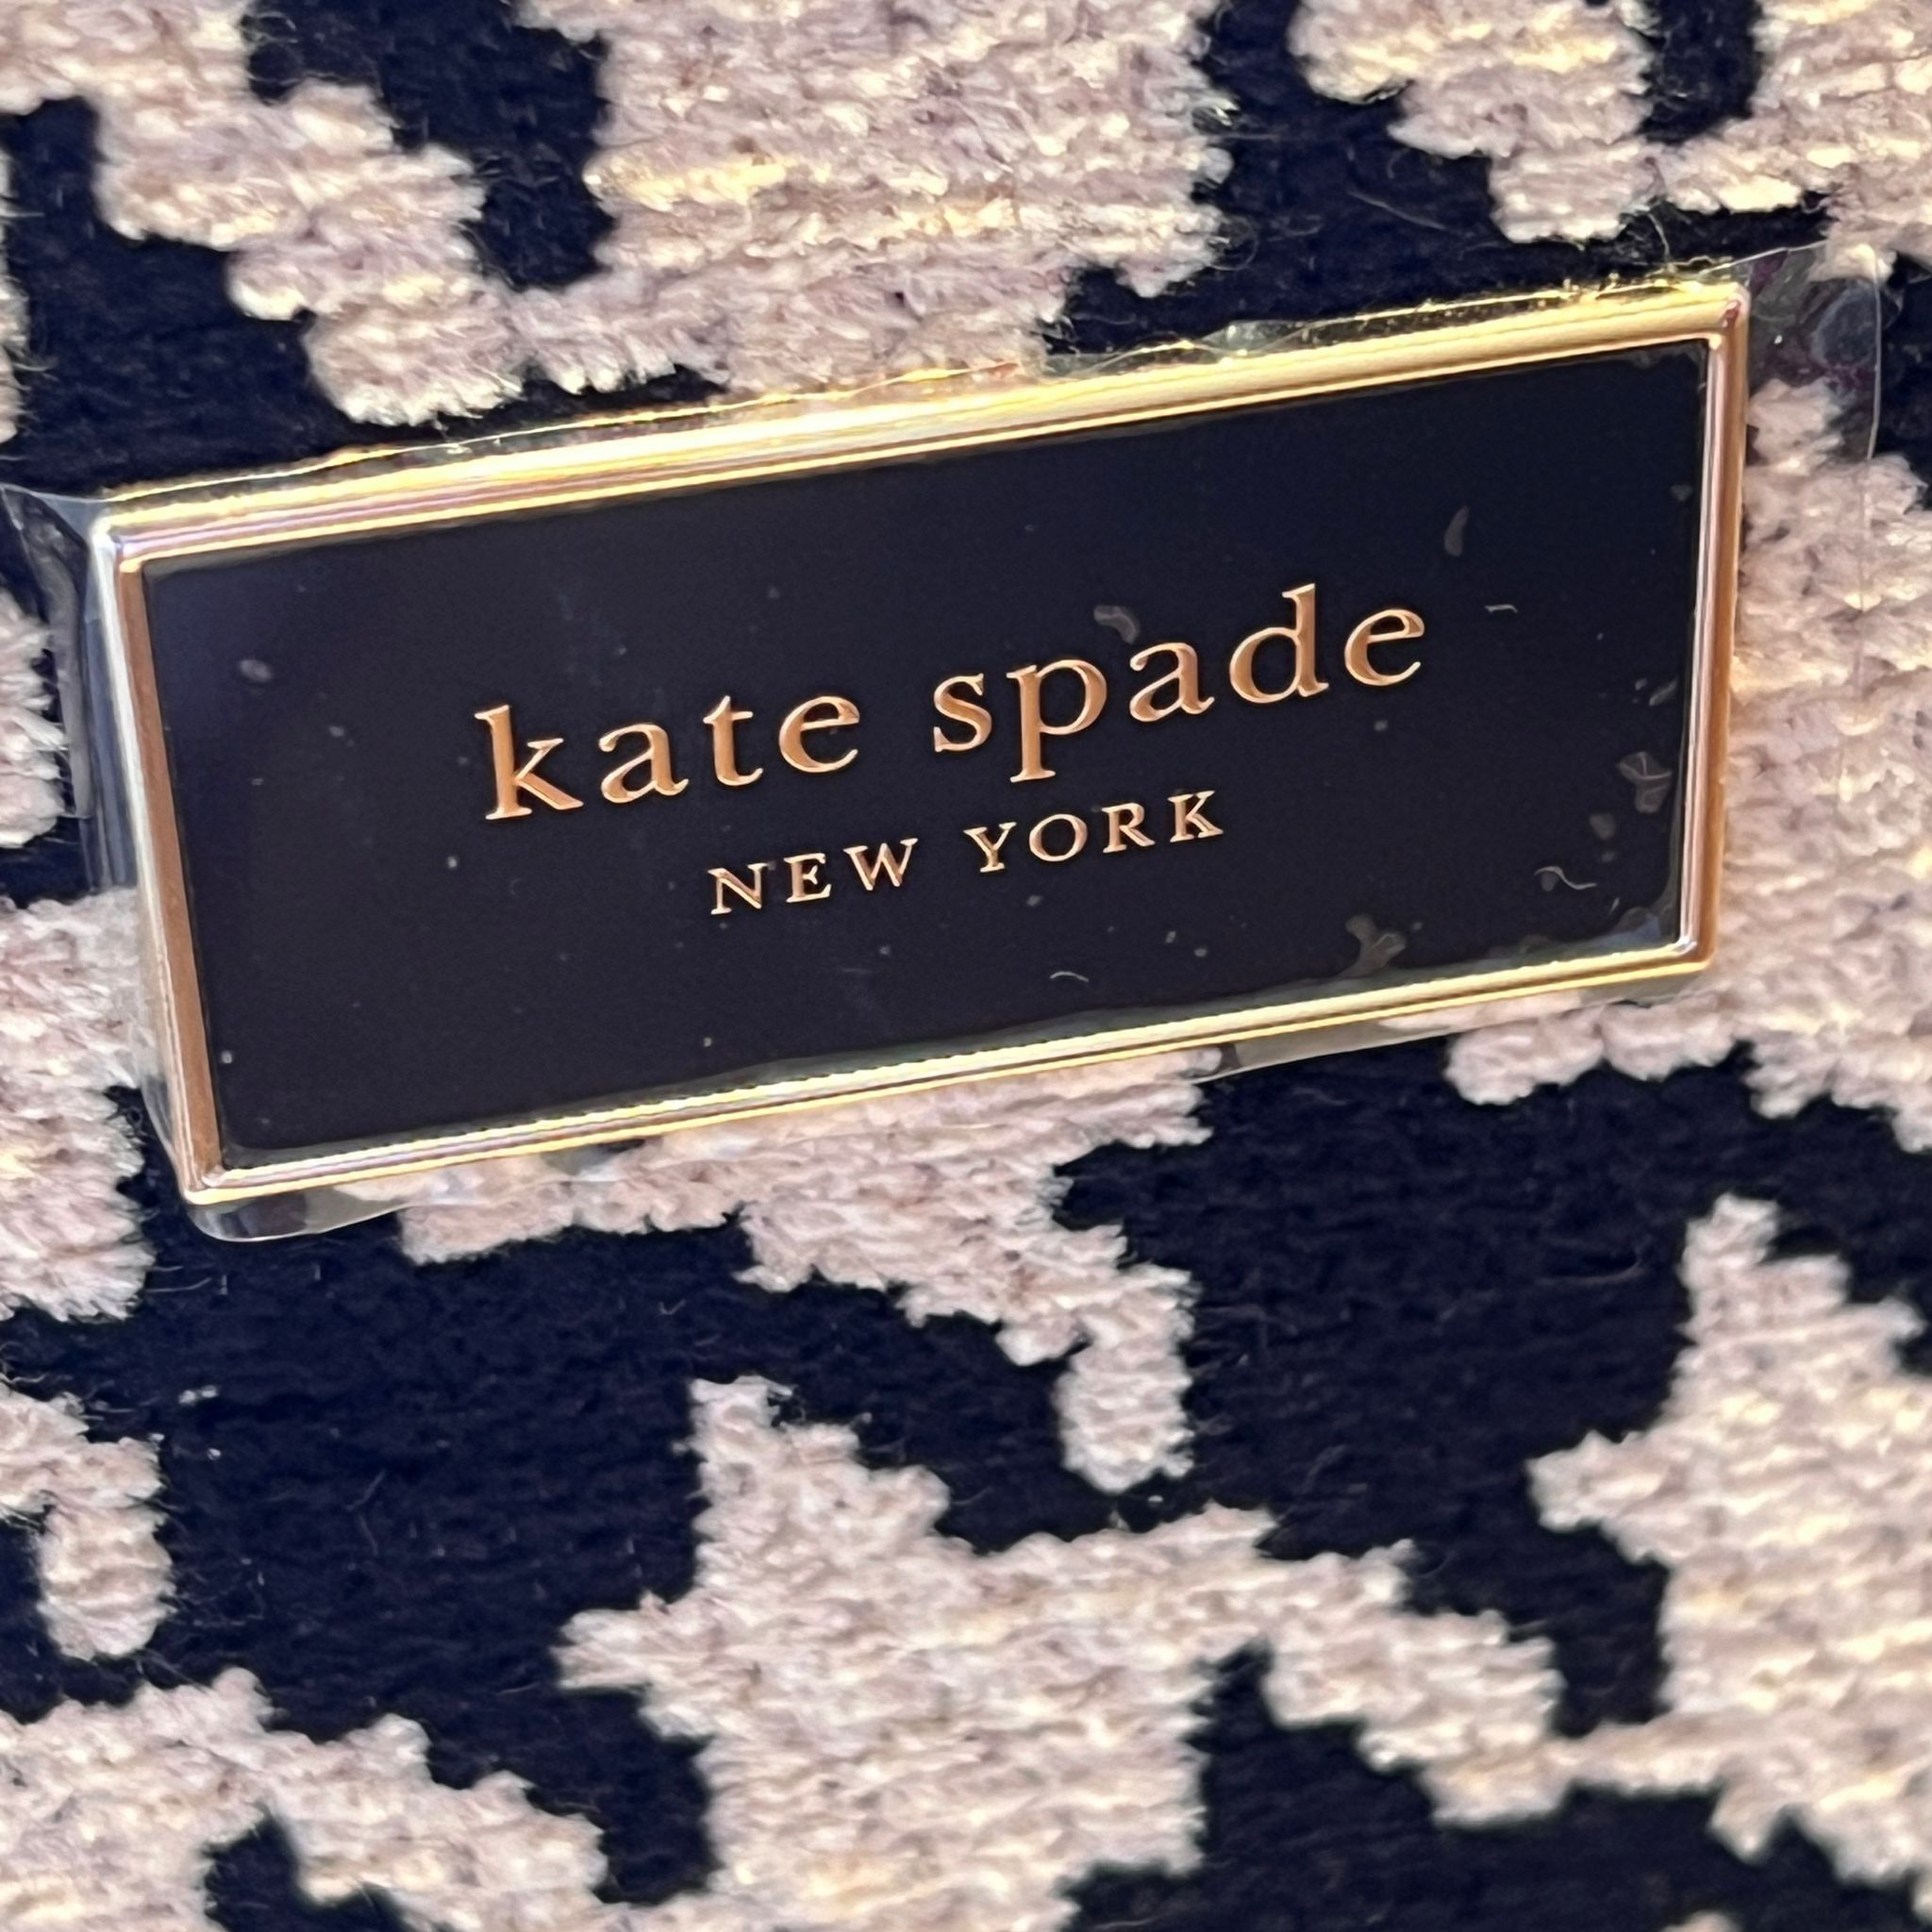 Kate Spade New York Manhattan Houndstooth Chenille Fabric Large